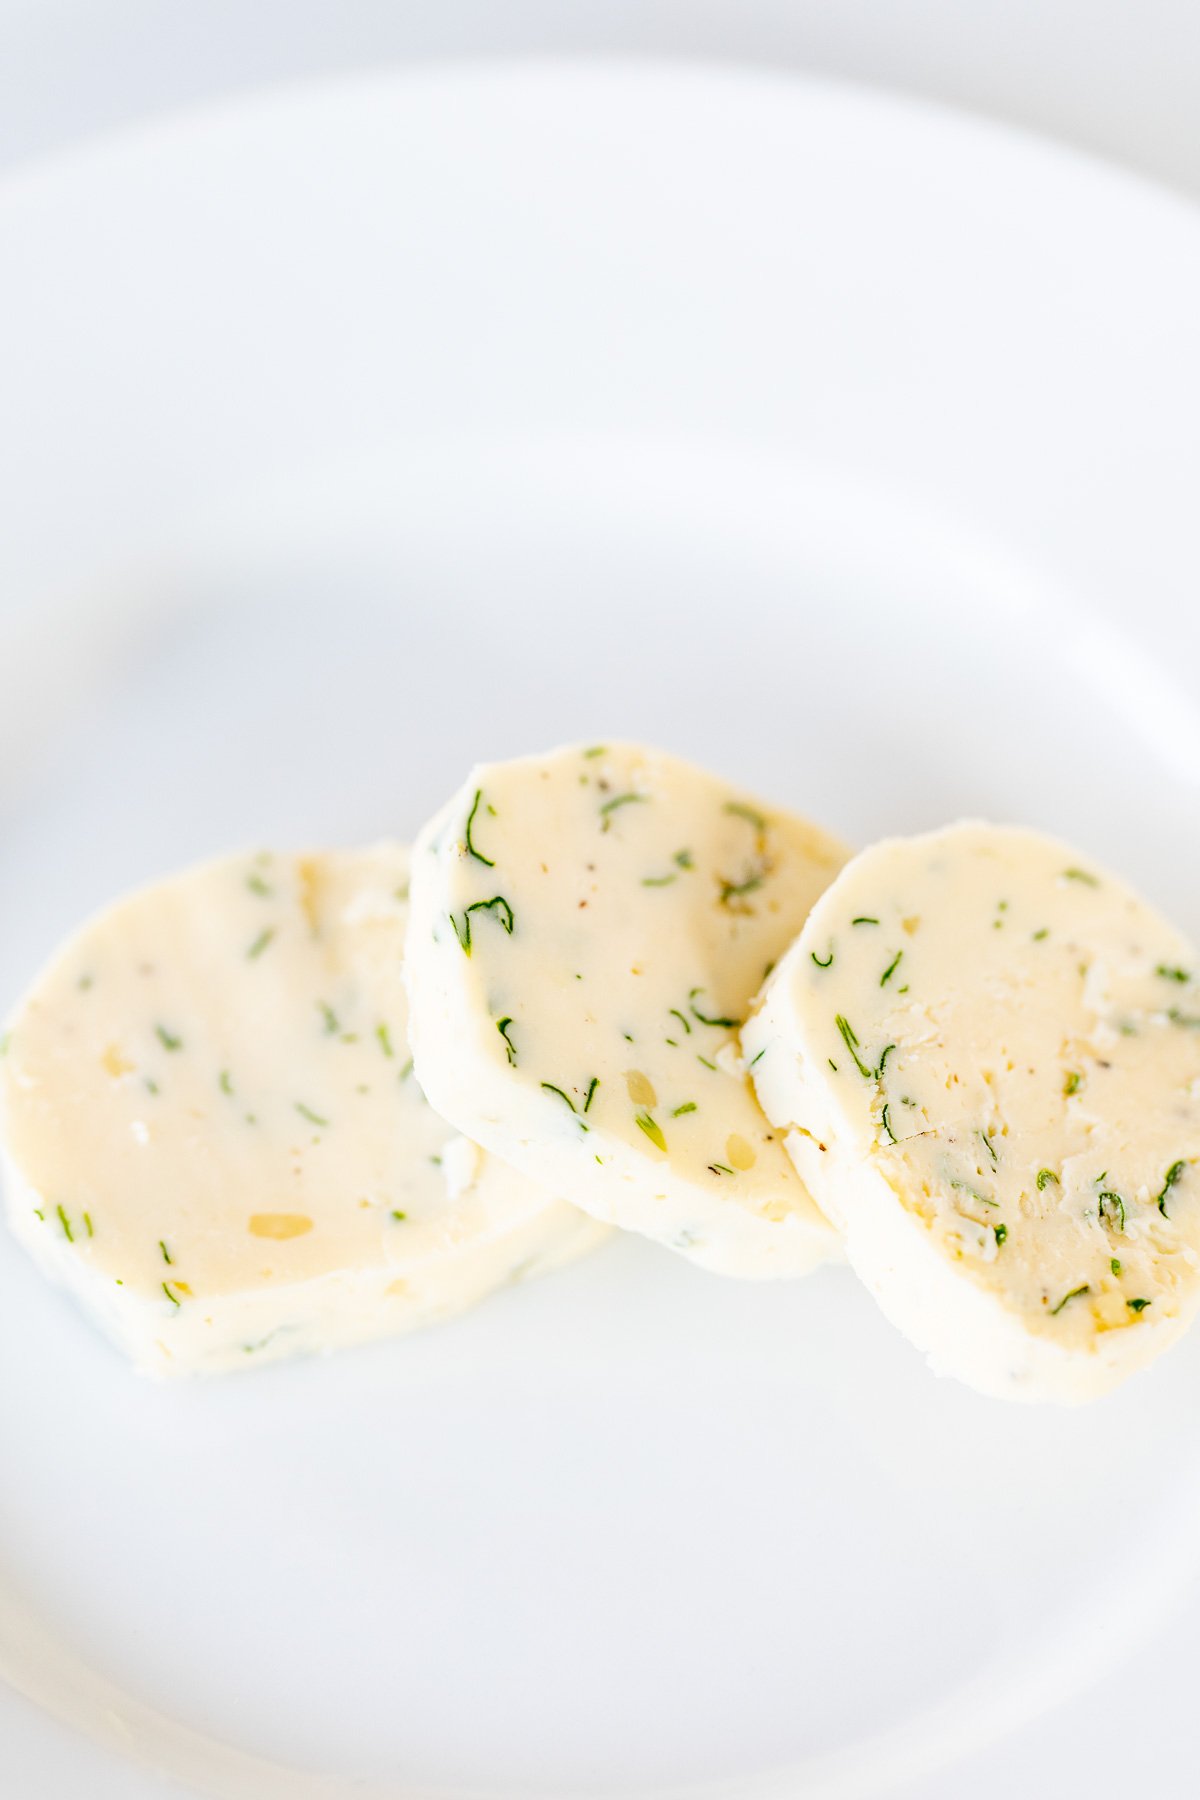 Three pats of herbed steak butter on a white surface.